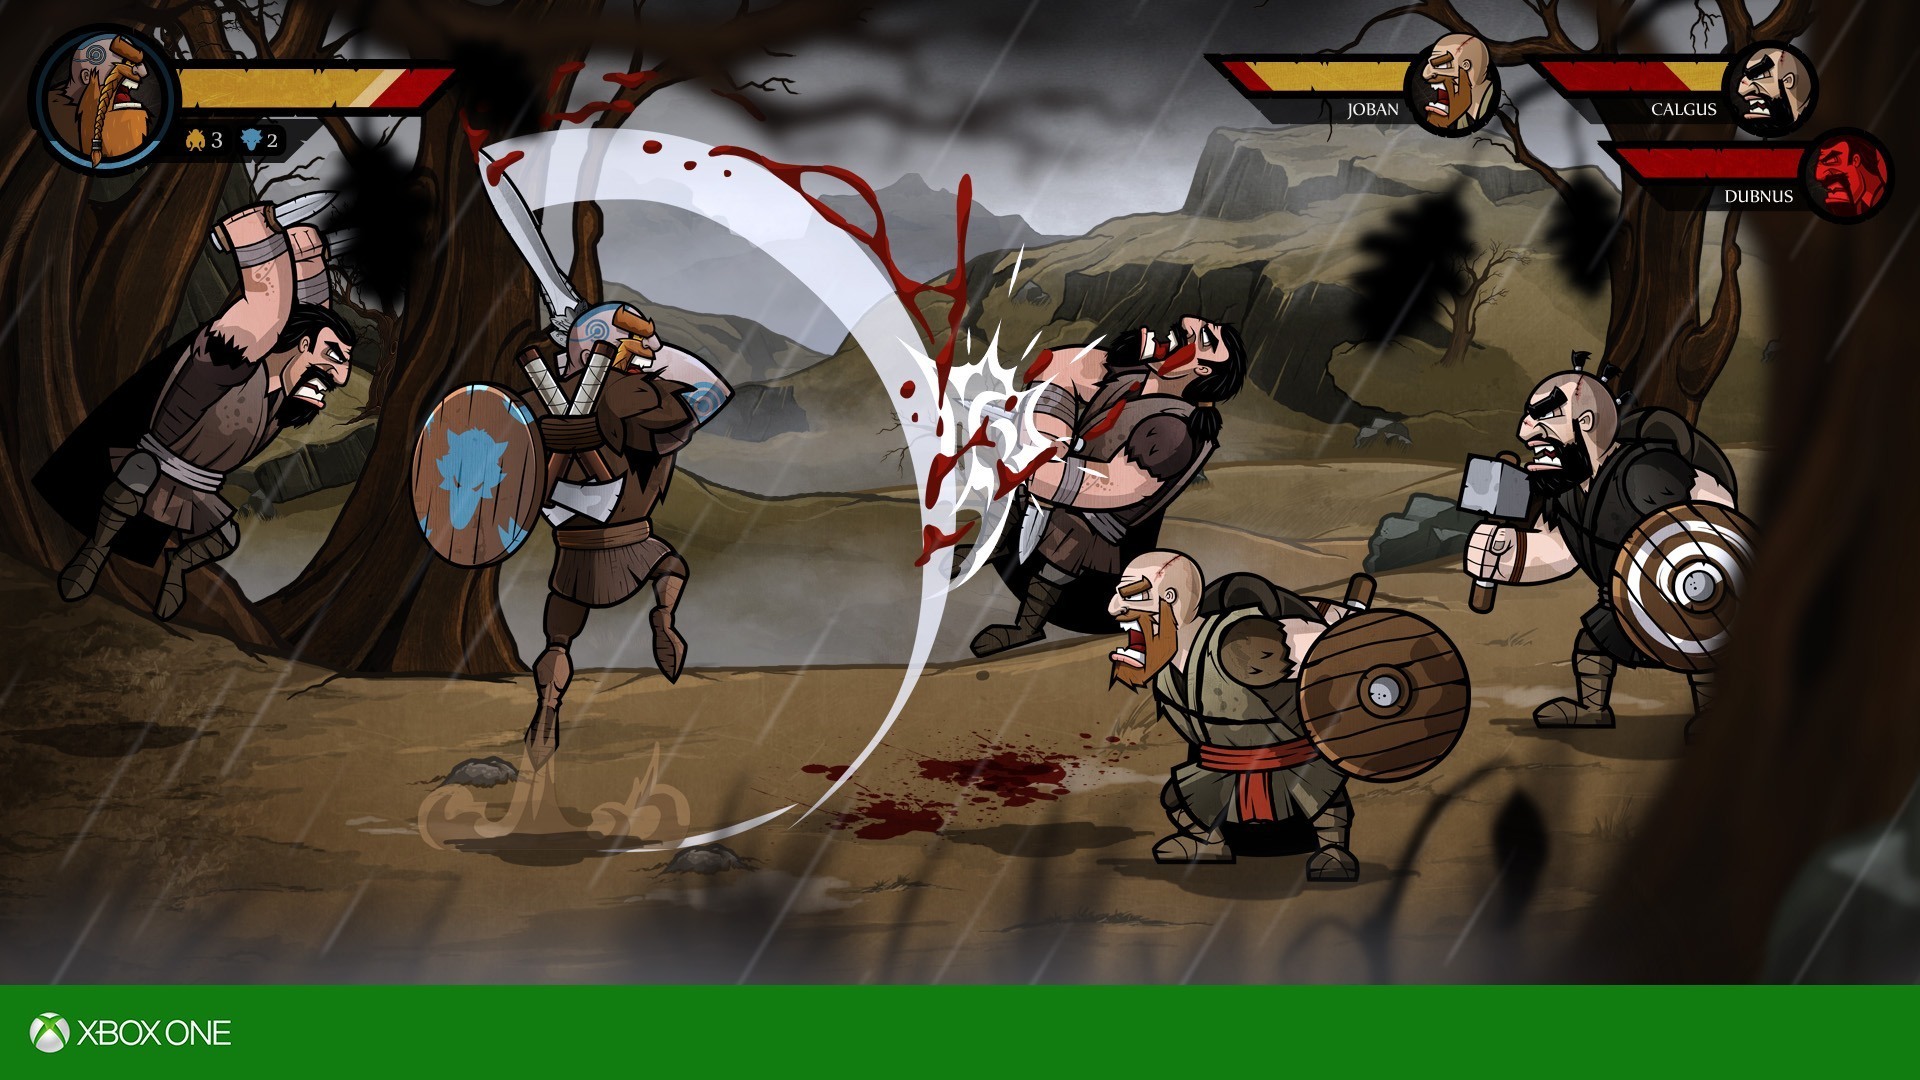 NEWS – Wulverblade is a new co-op brawler about to launch on PC, PS4, and Xbox One